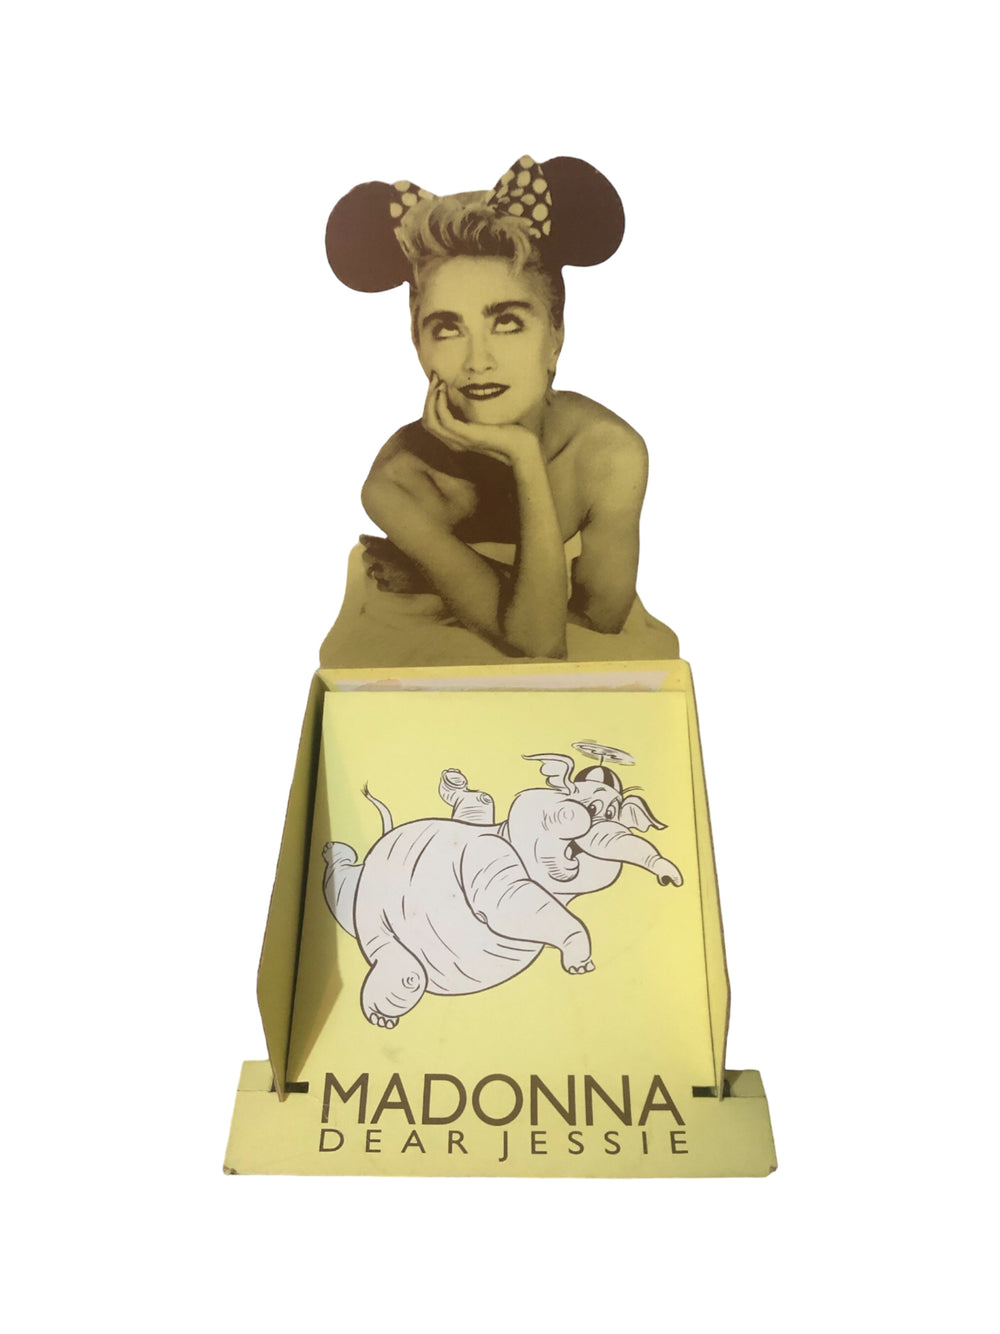 Madonna - Dear Jessie Shaped Promotional Display Stand and record Sleeve Preloved:1989